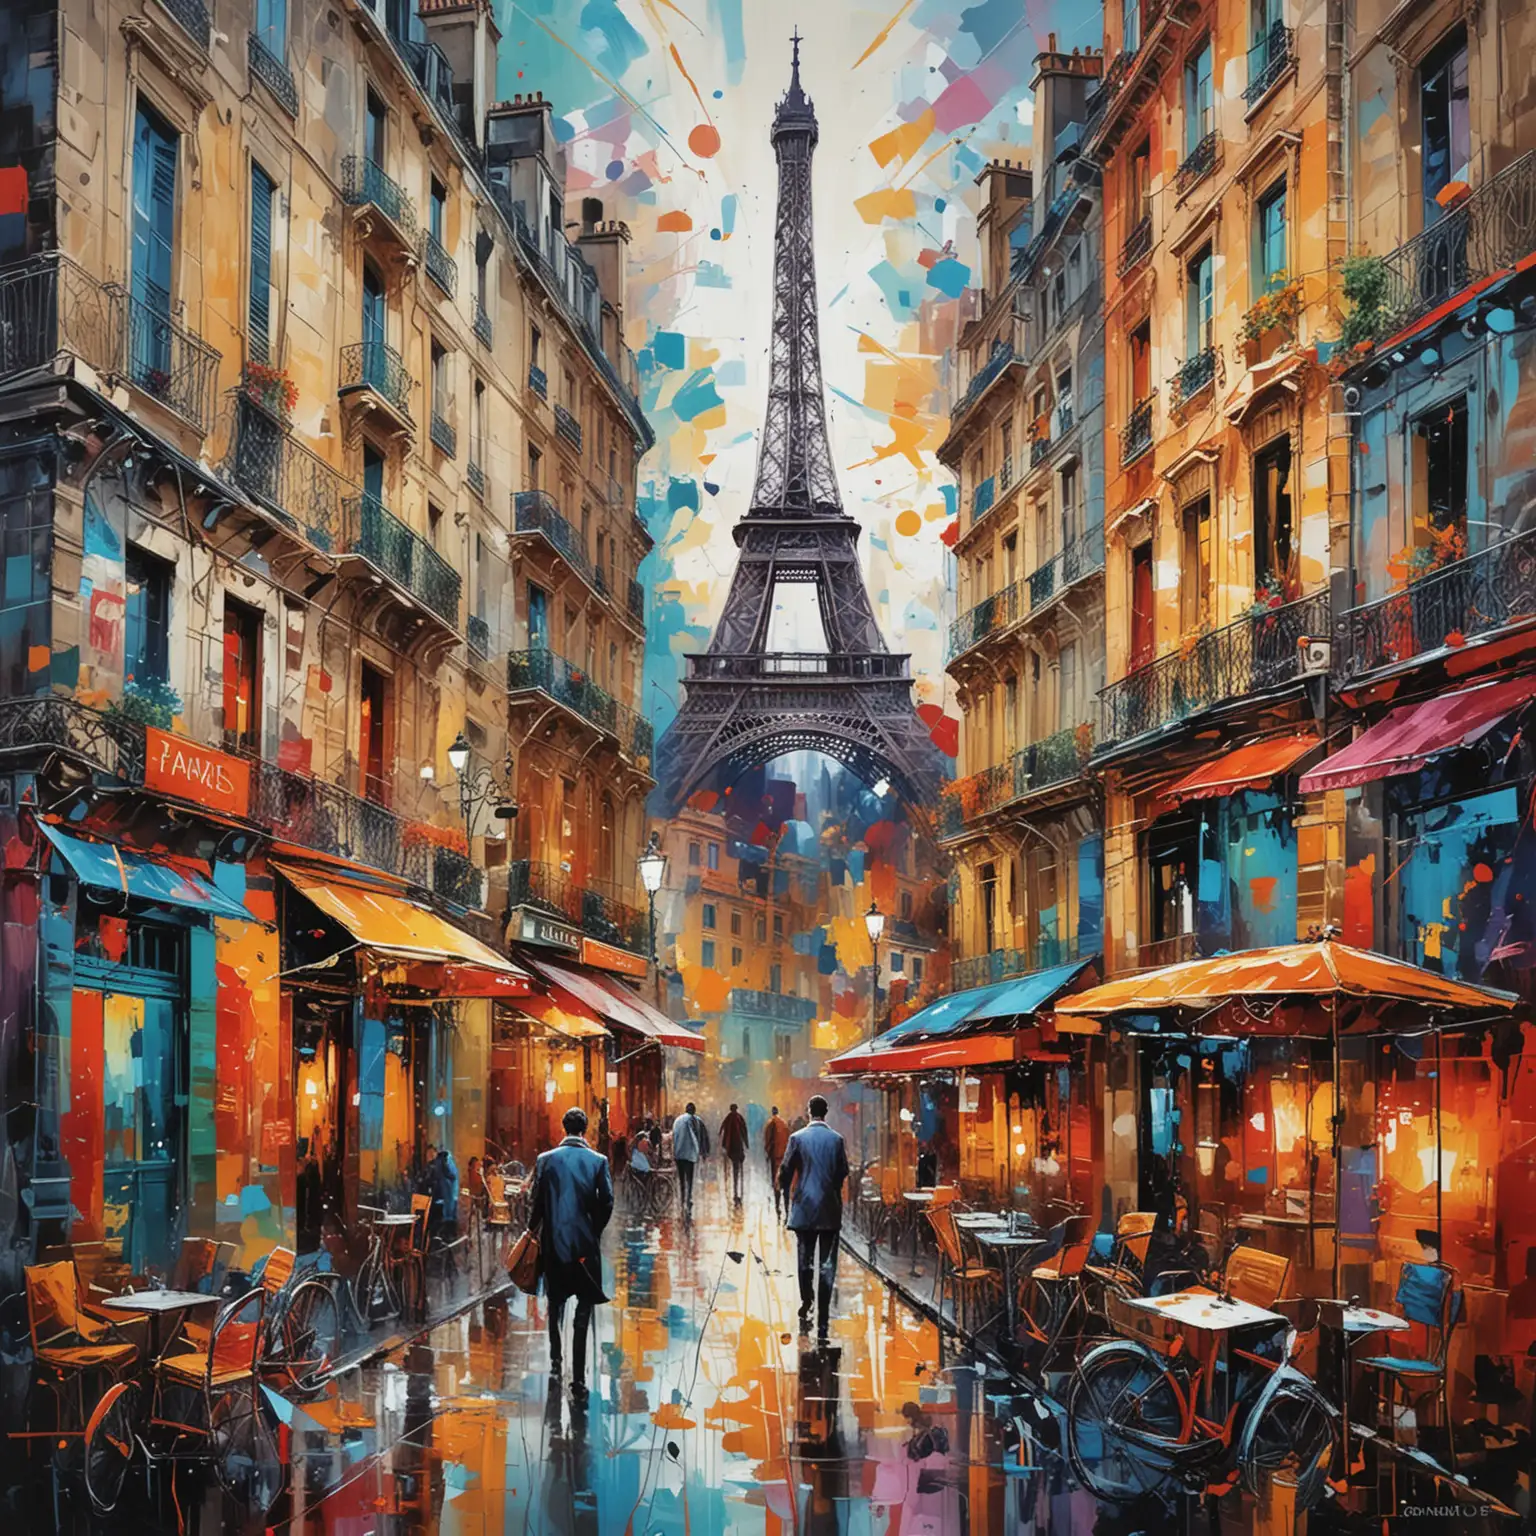 Vibrant Abstract Expressionist Depiction of Paris with Surreal Atmosphere